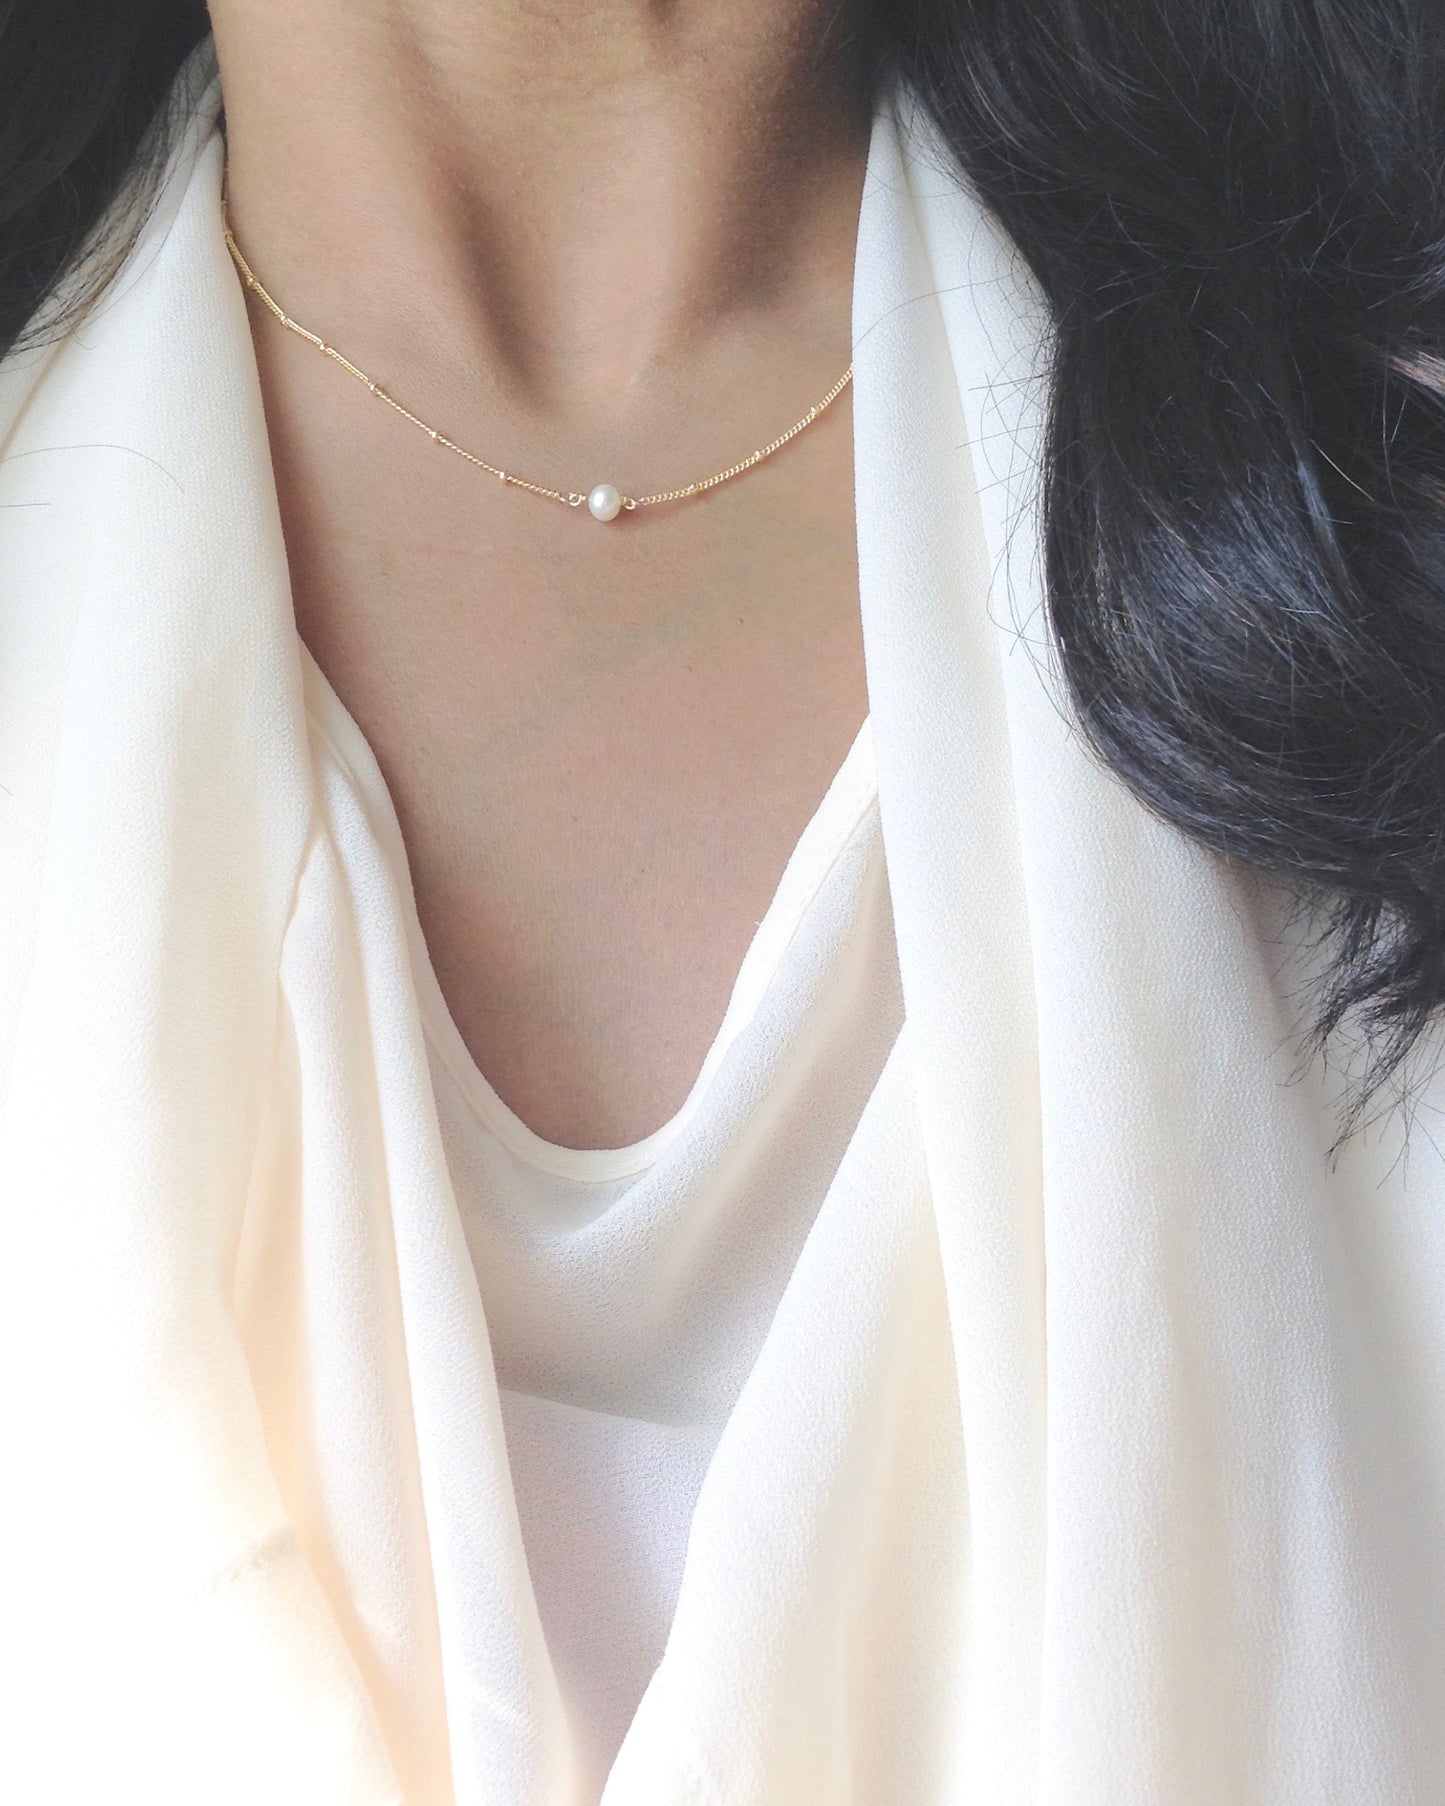 Small Minimal Pearl Necklace | Small Dainty Necklace in Gold Filled or Sterling Silver | IB Jewelry